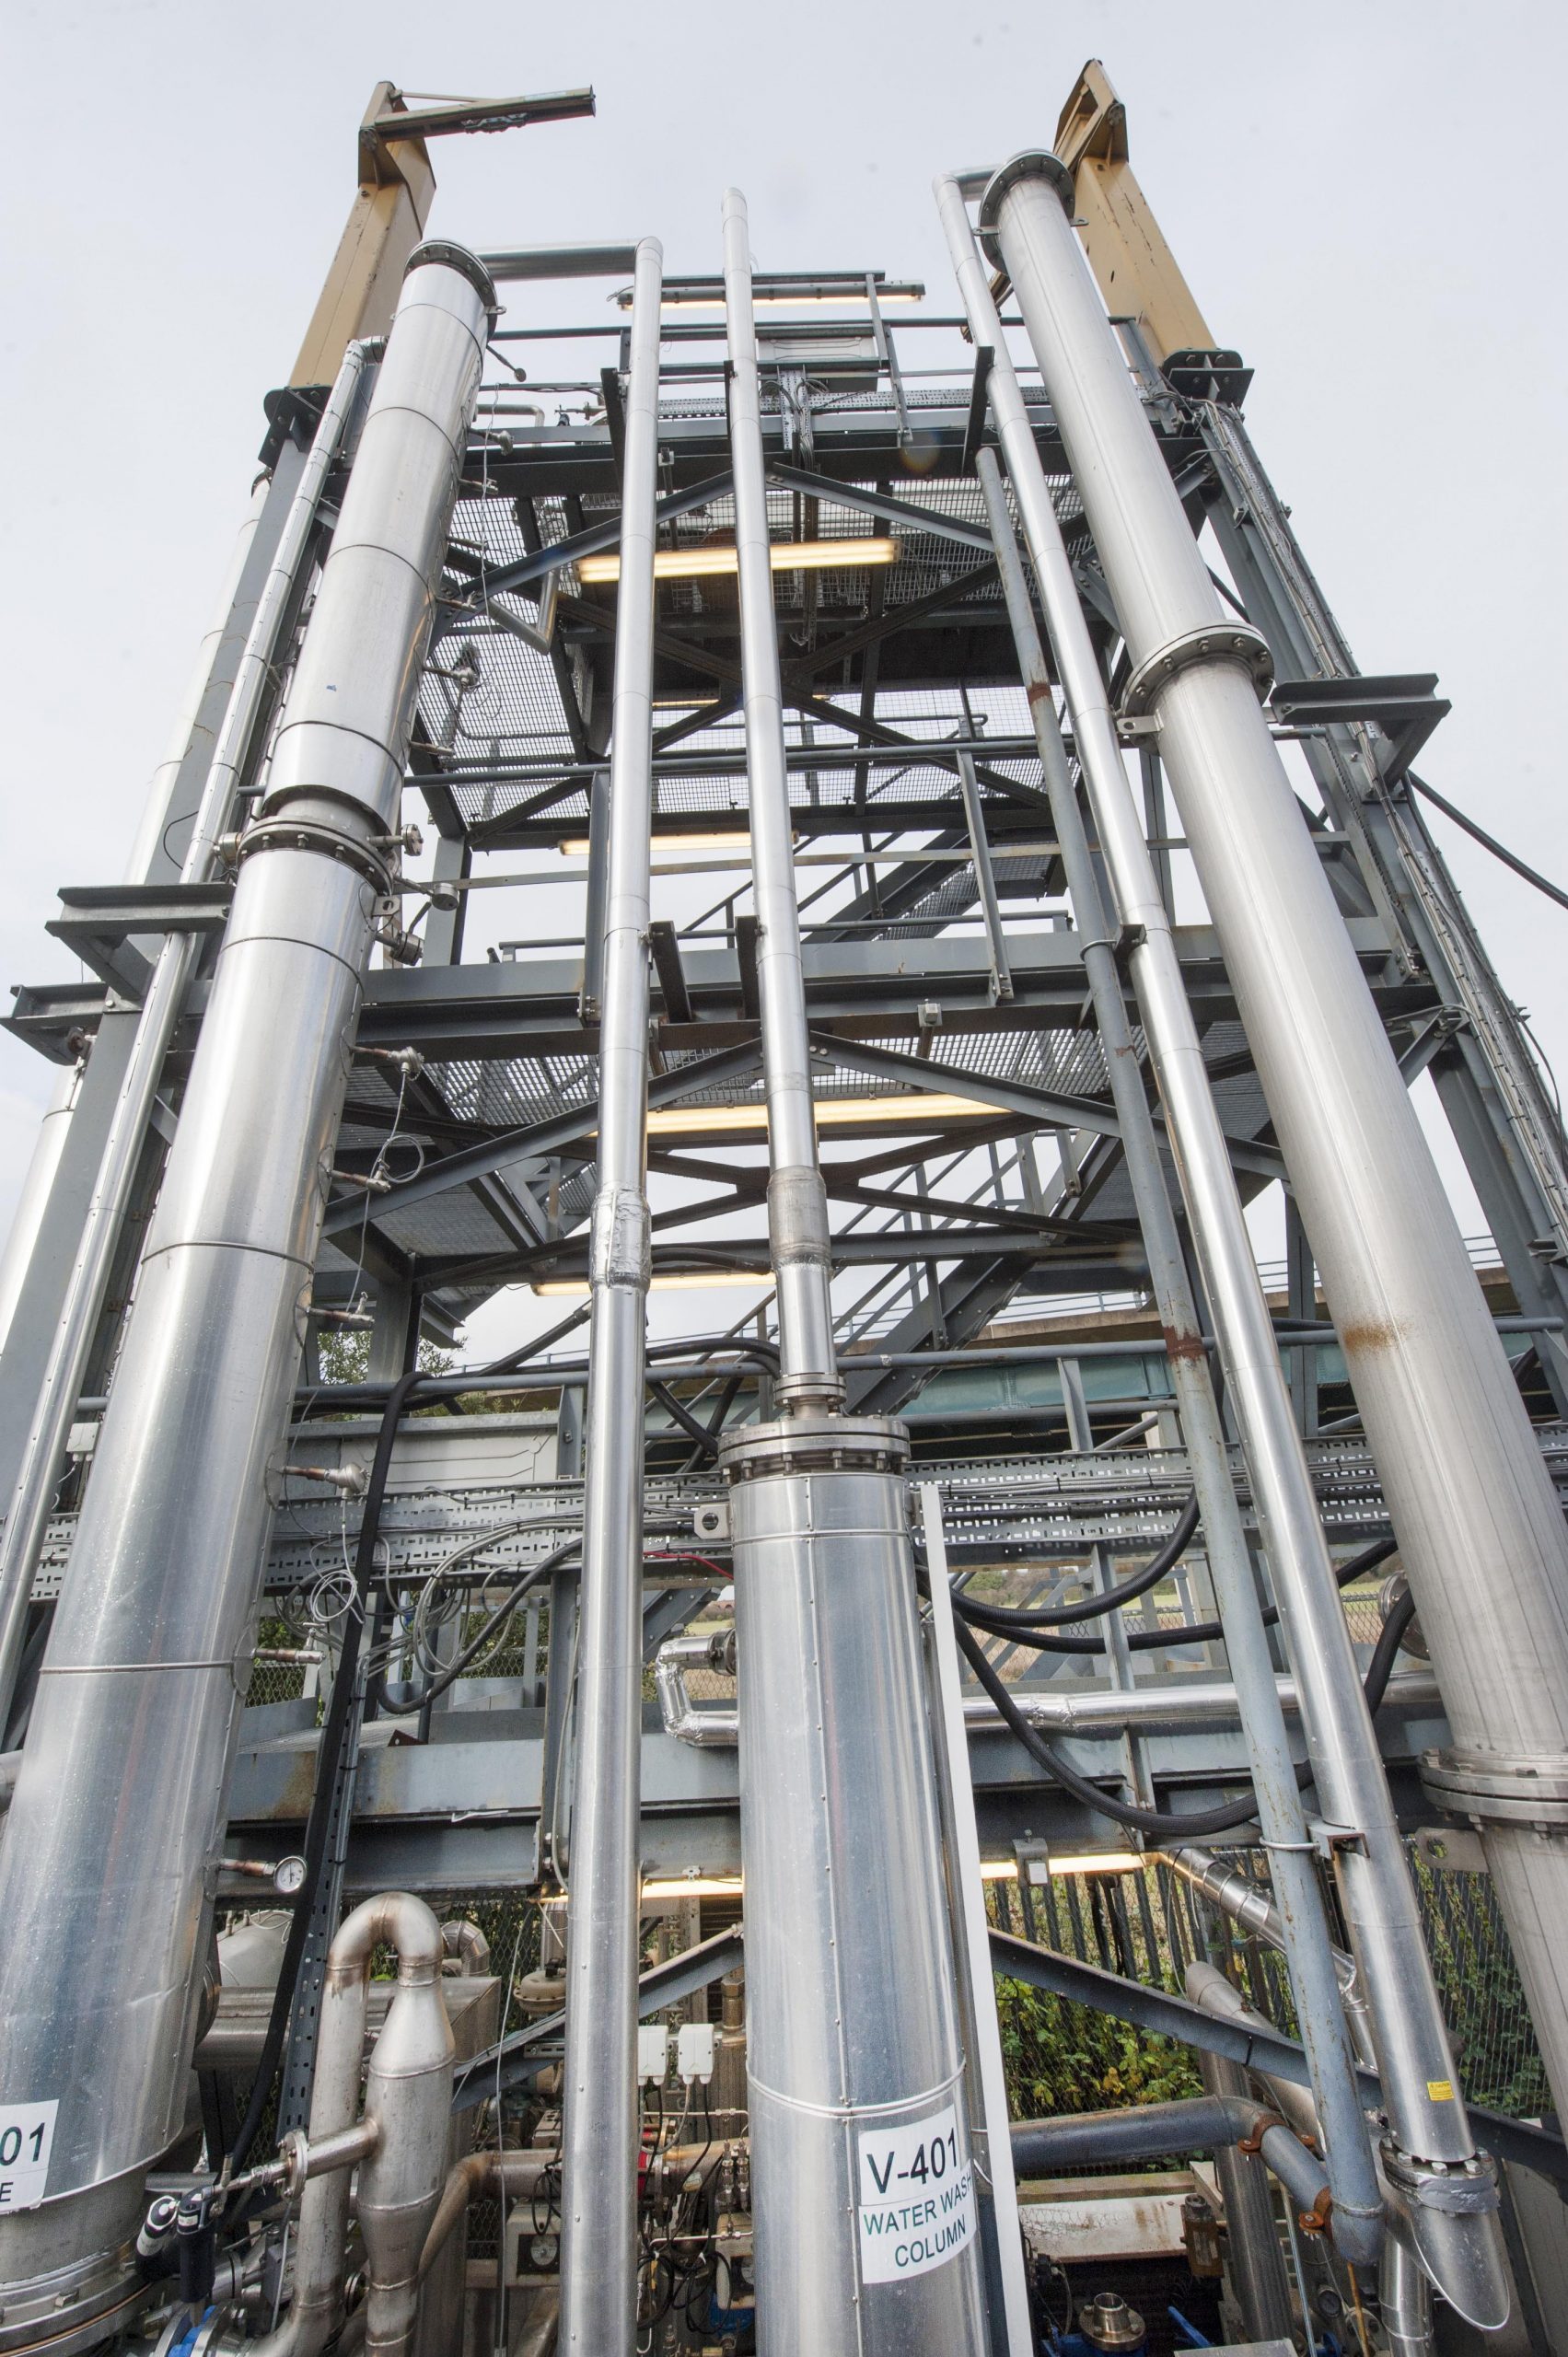 a picture of the tall, metallic pipes of the amine capture plant